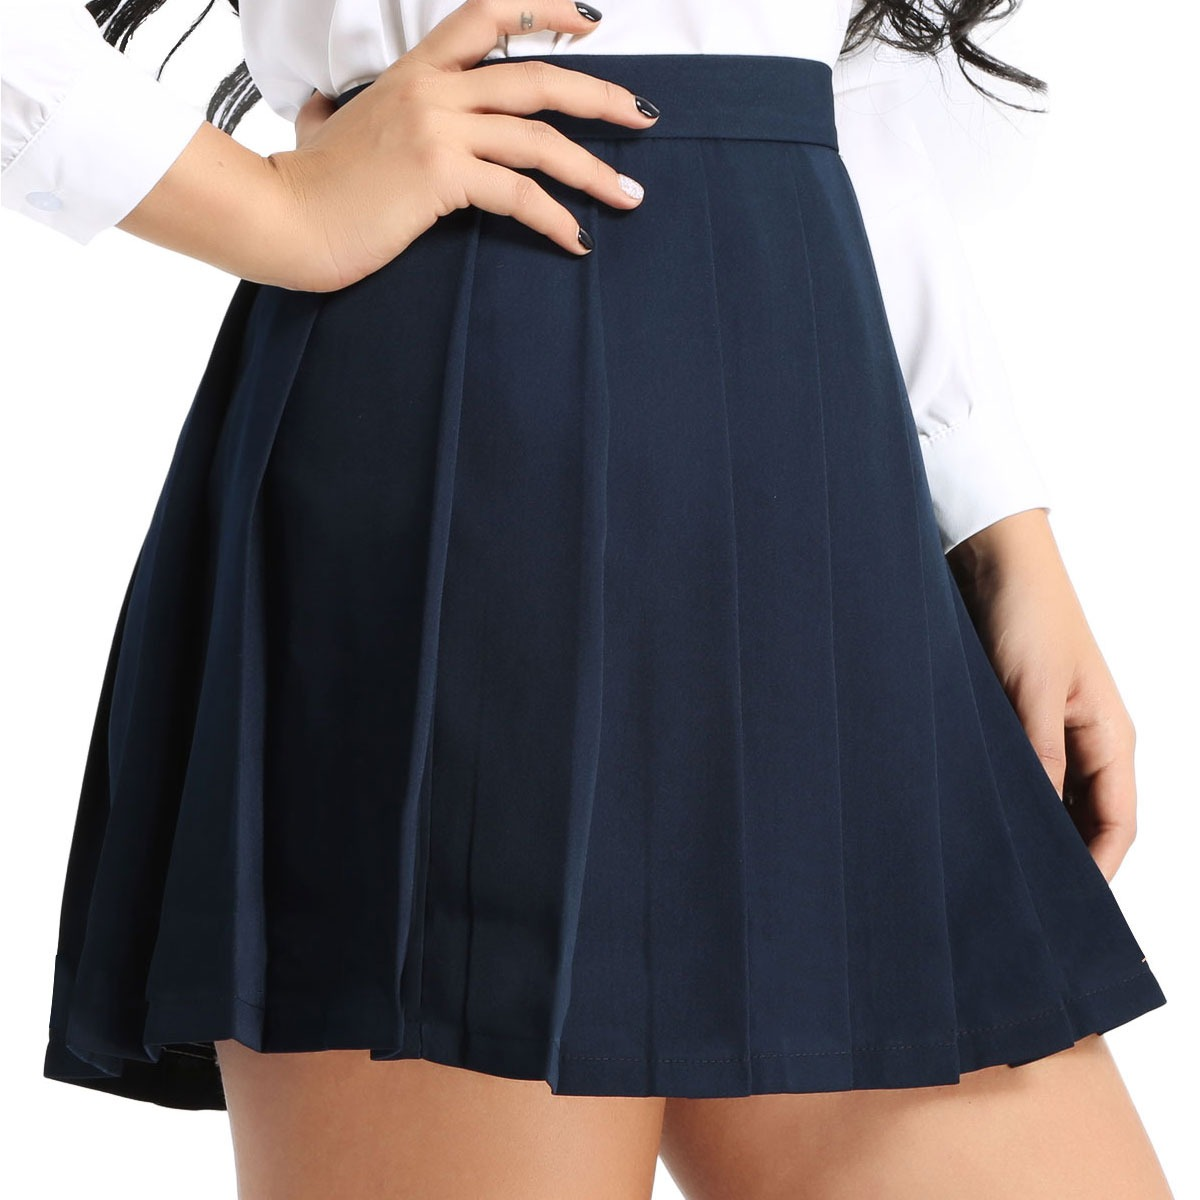 Women's High Waisted Pleated Mini Skirt / A-Line Solid Color Skirt / School Girl Cosplay Costume - HARD'N'HEAVY